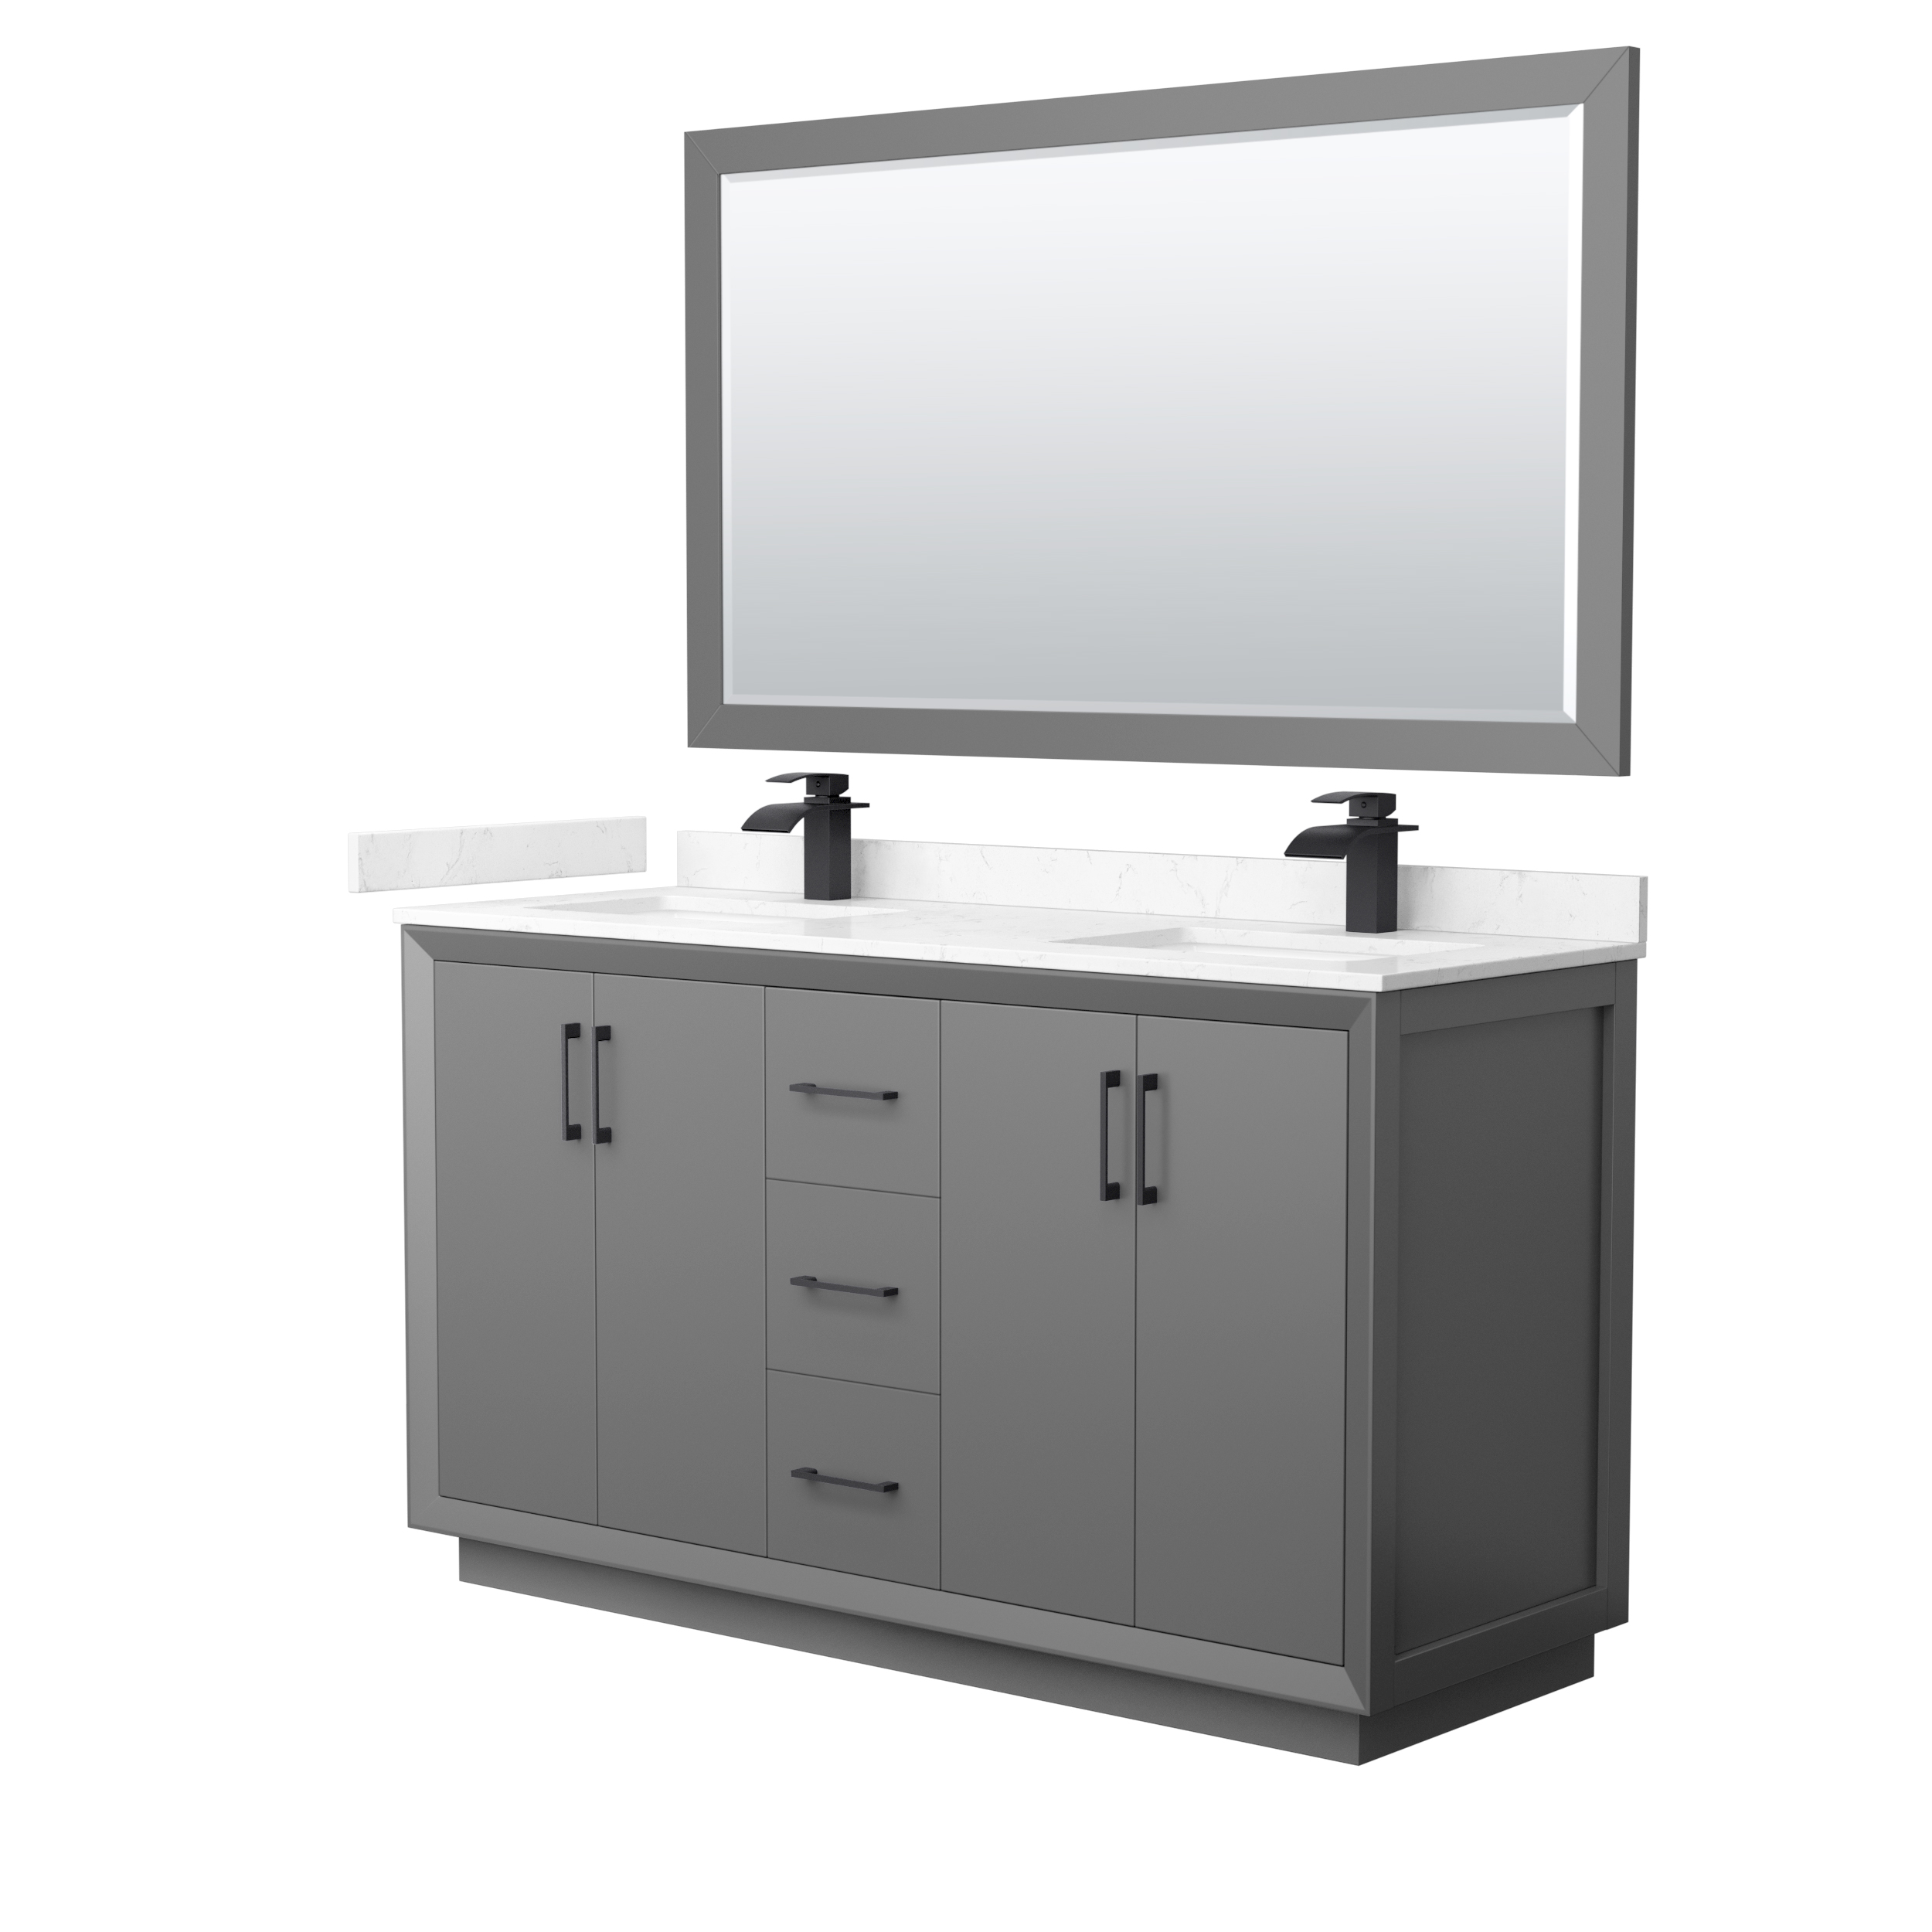 60" Transitional Double Vanity Base in Dark Grey, 3 Top Option, with 3 Hardware Options and Mirror Option